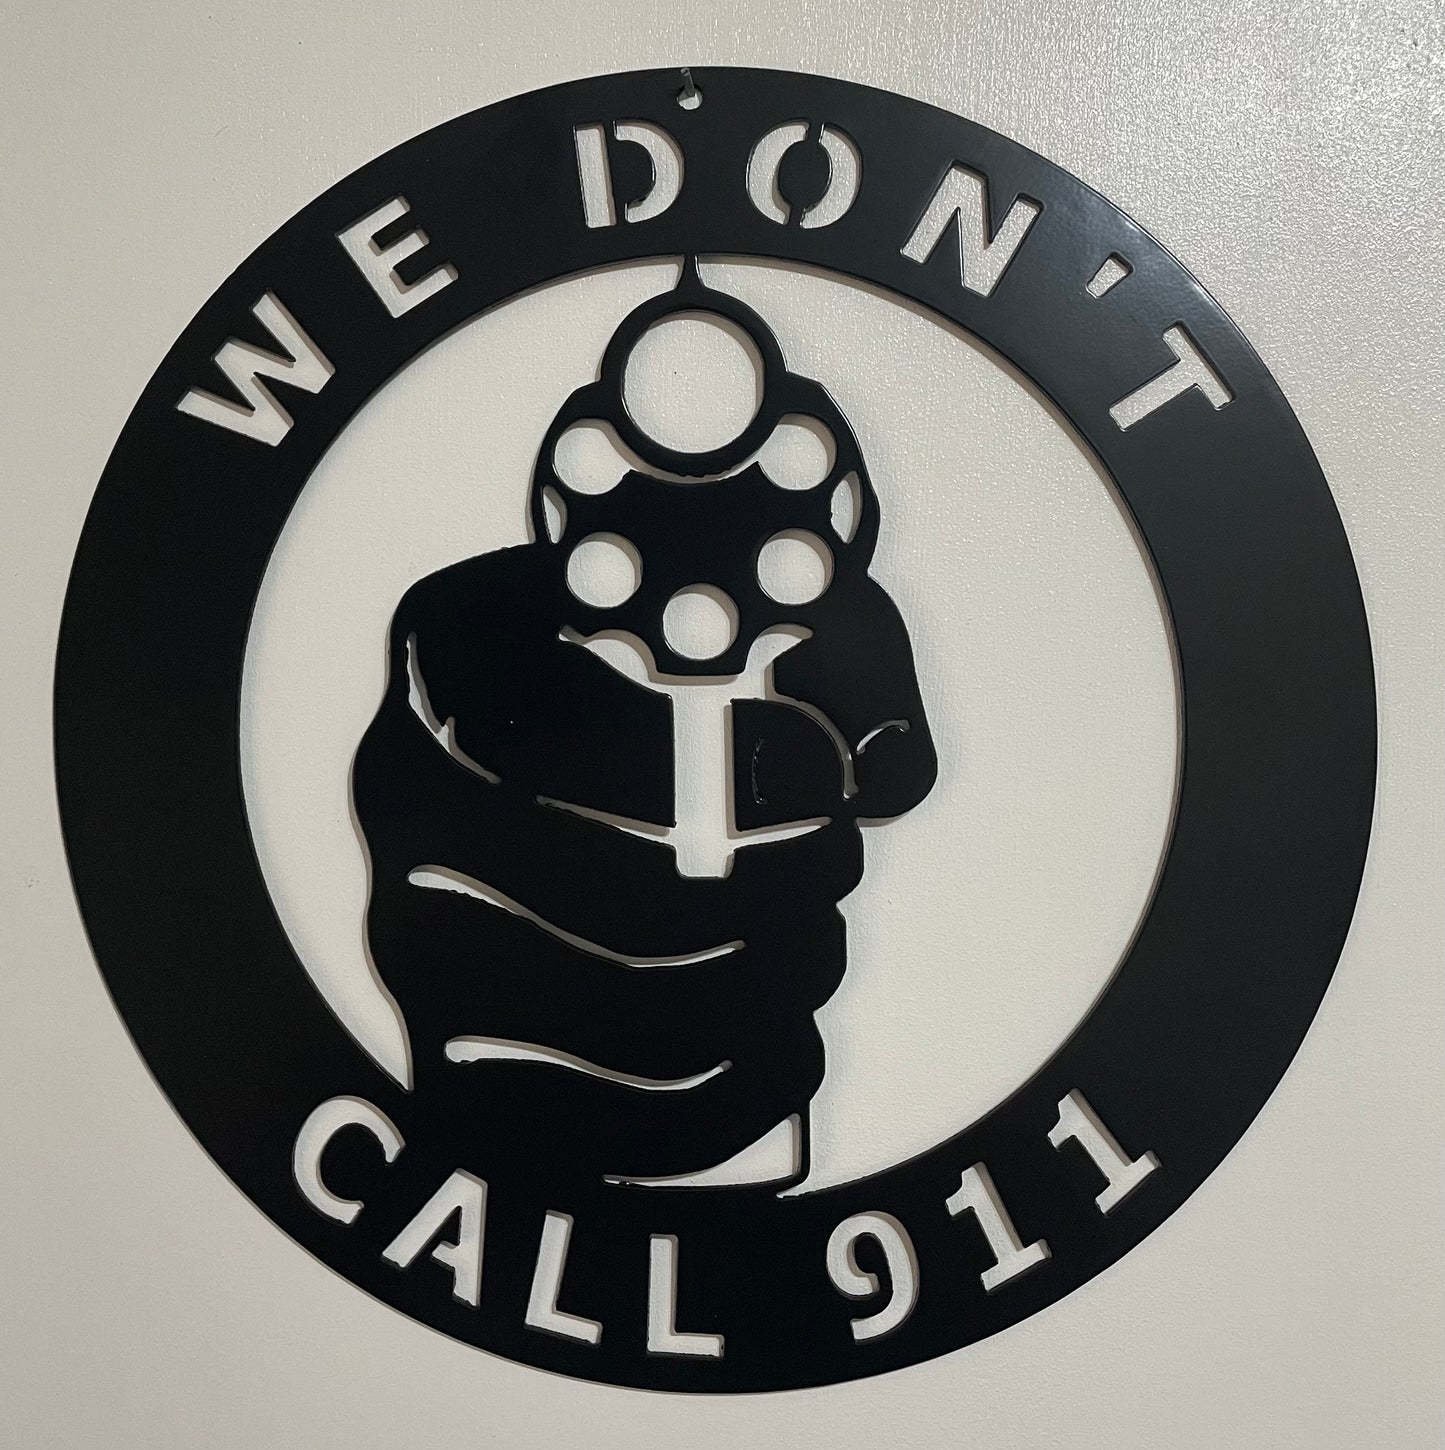 We Don't Call 911